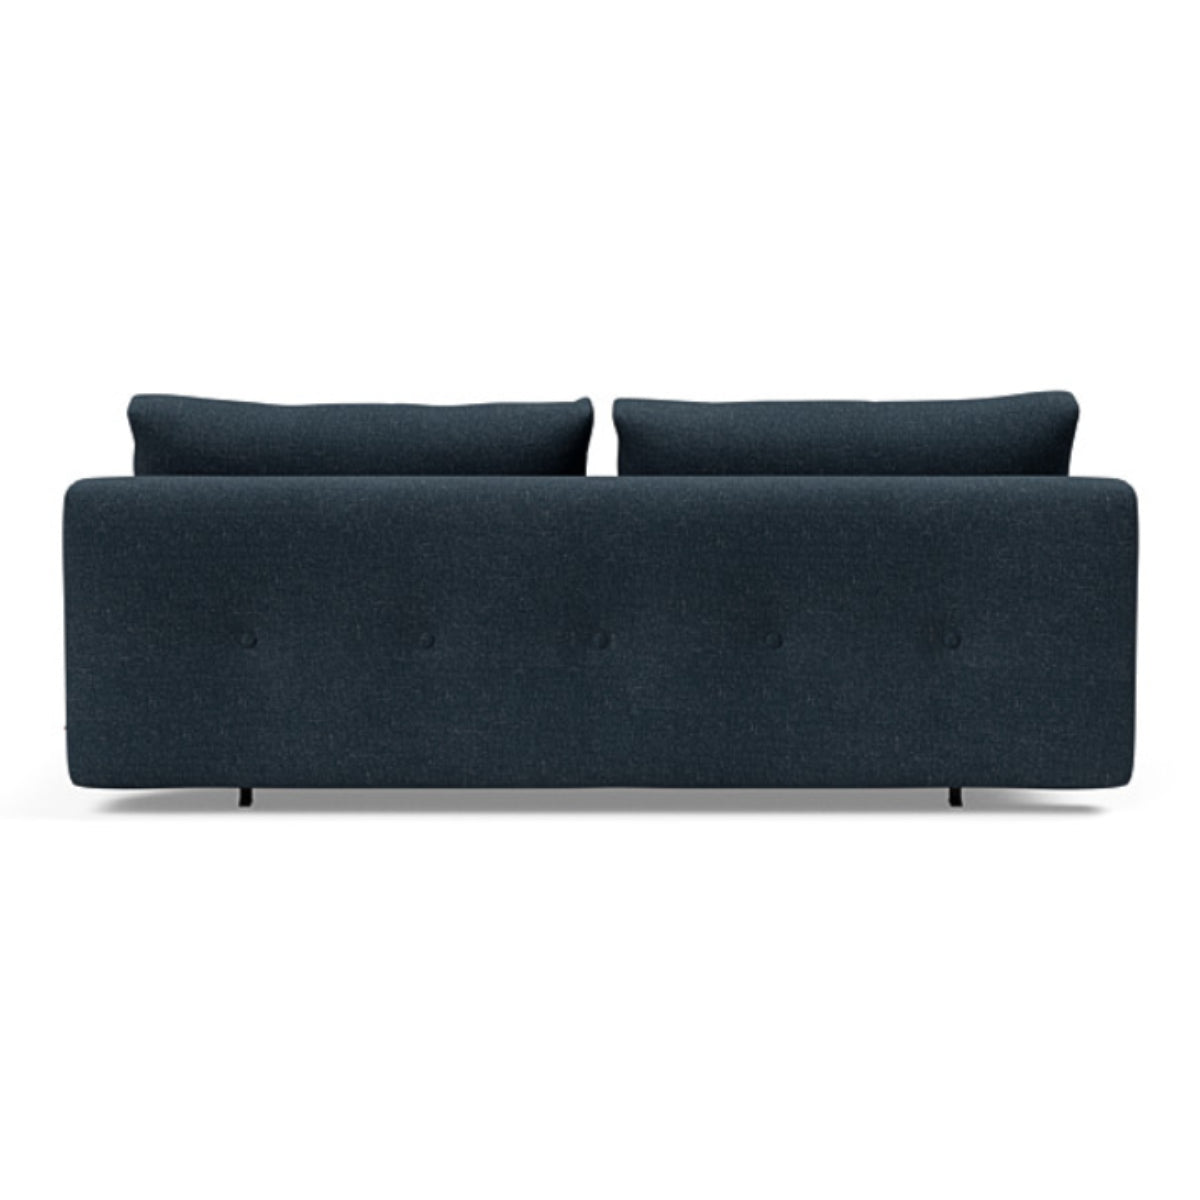 Load image into Gallery viewer, Recast Plus Sofa Bed Dark Styletto Daybed INNOVATION     Four Hands, Burke Decor, Mid Century Modern Furniture, Old Bones Furniture Company, Old Bones Co, Modern Mid Century, Designer Furniture, https://www.oldbonesco.com/
